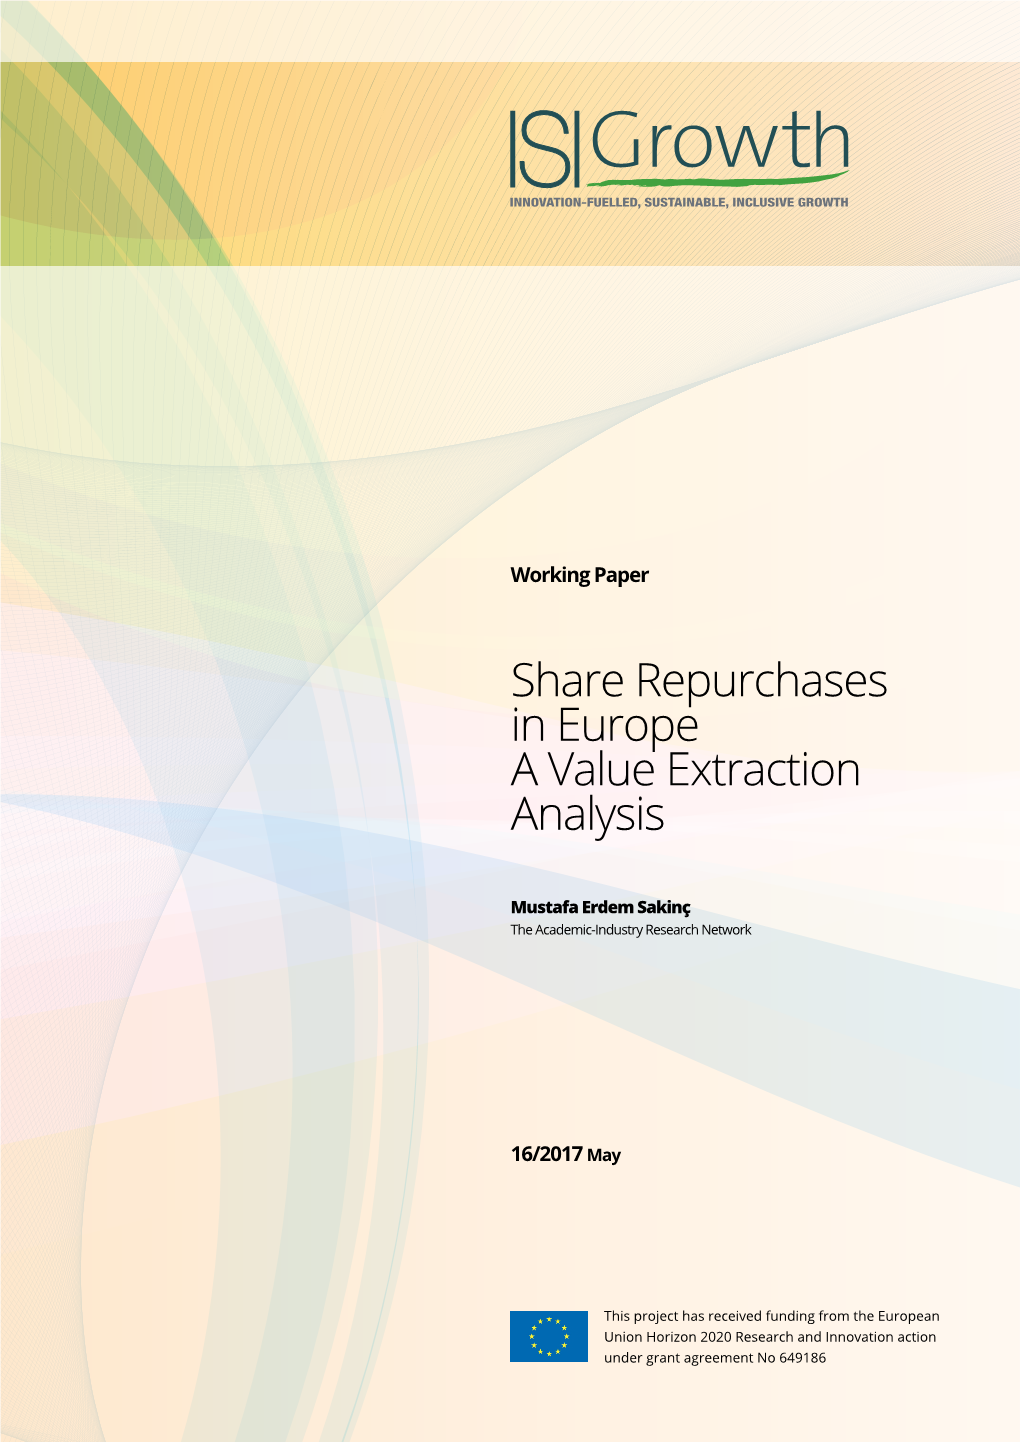 Share Repurchases in Europe a Value Extraction Analysis